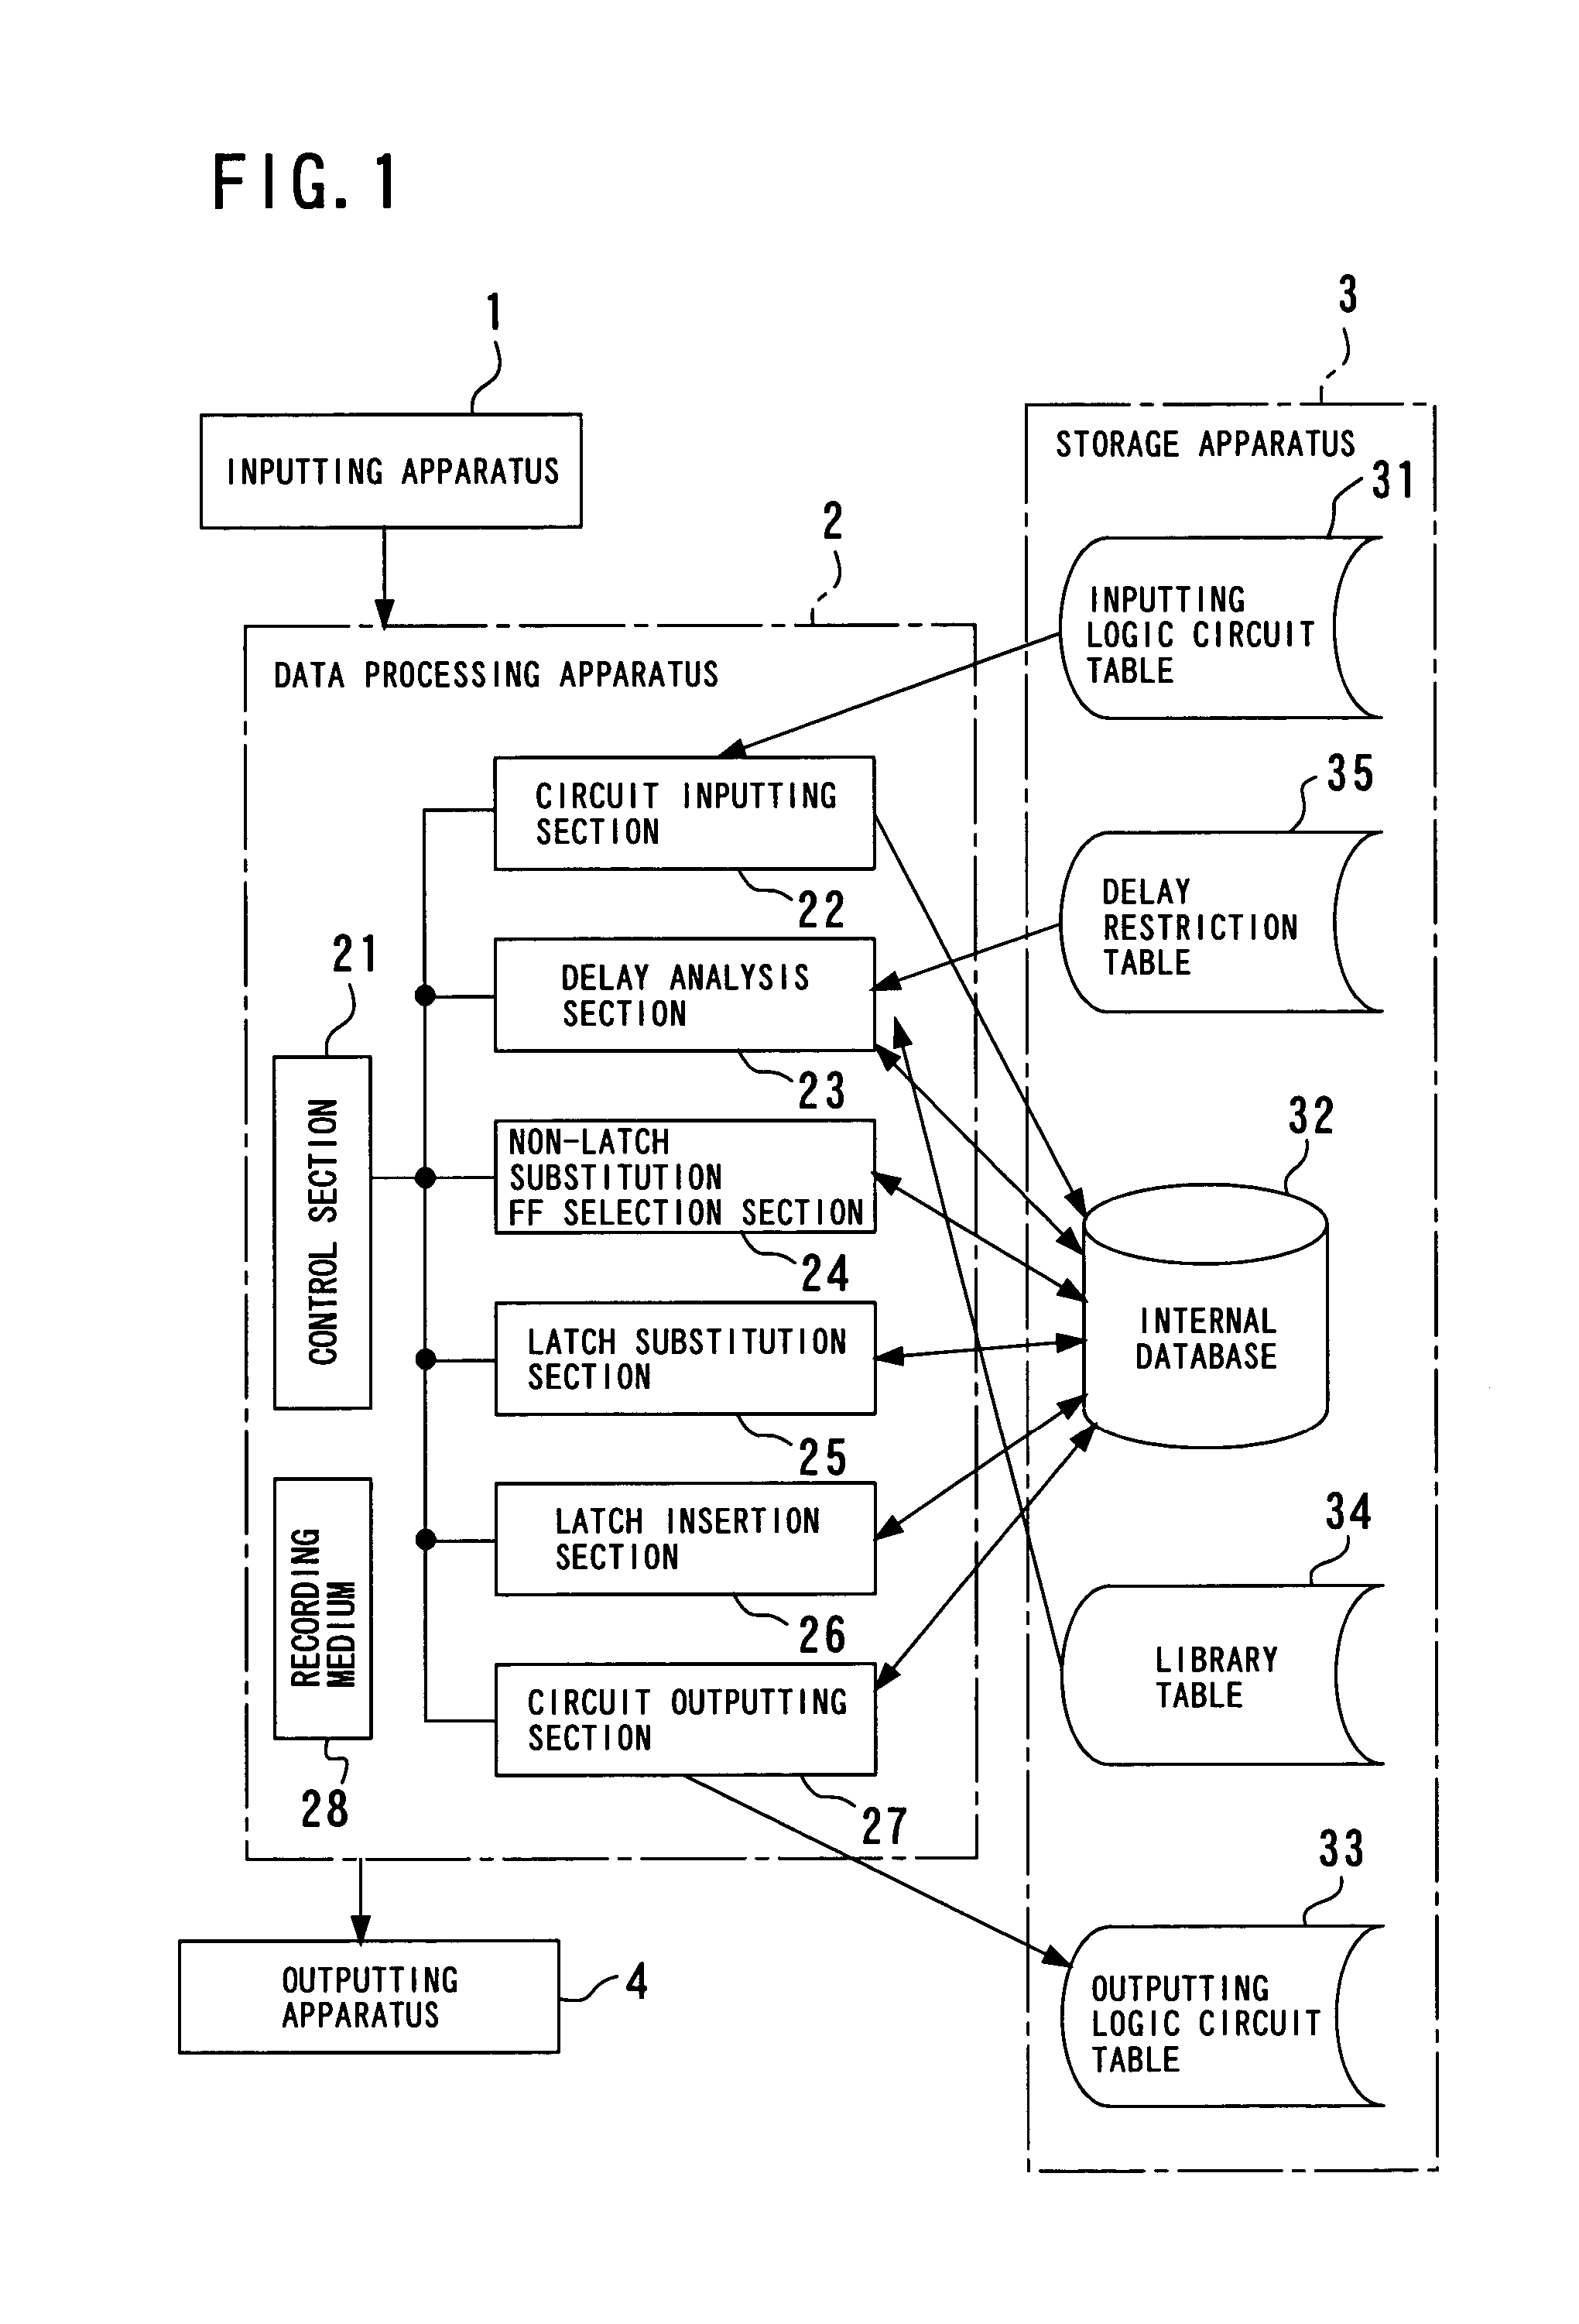 Delay optimization designing system and delay optimization designing method for a logic circuit and control program